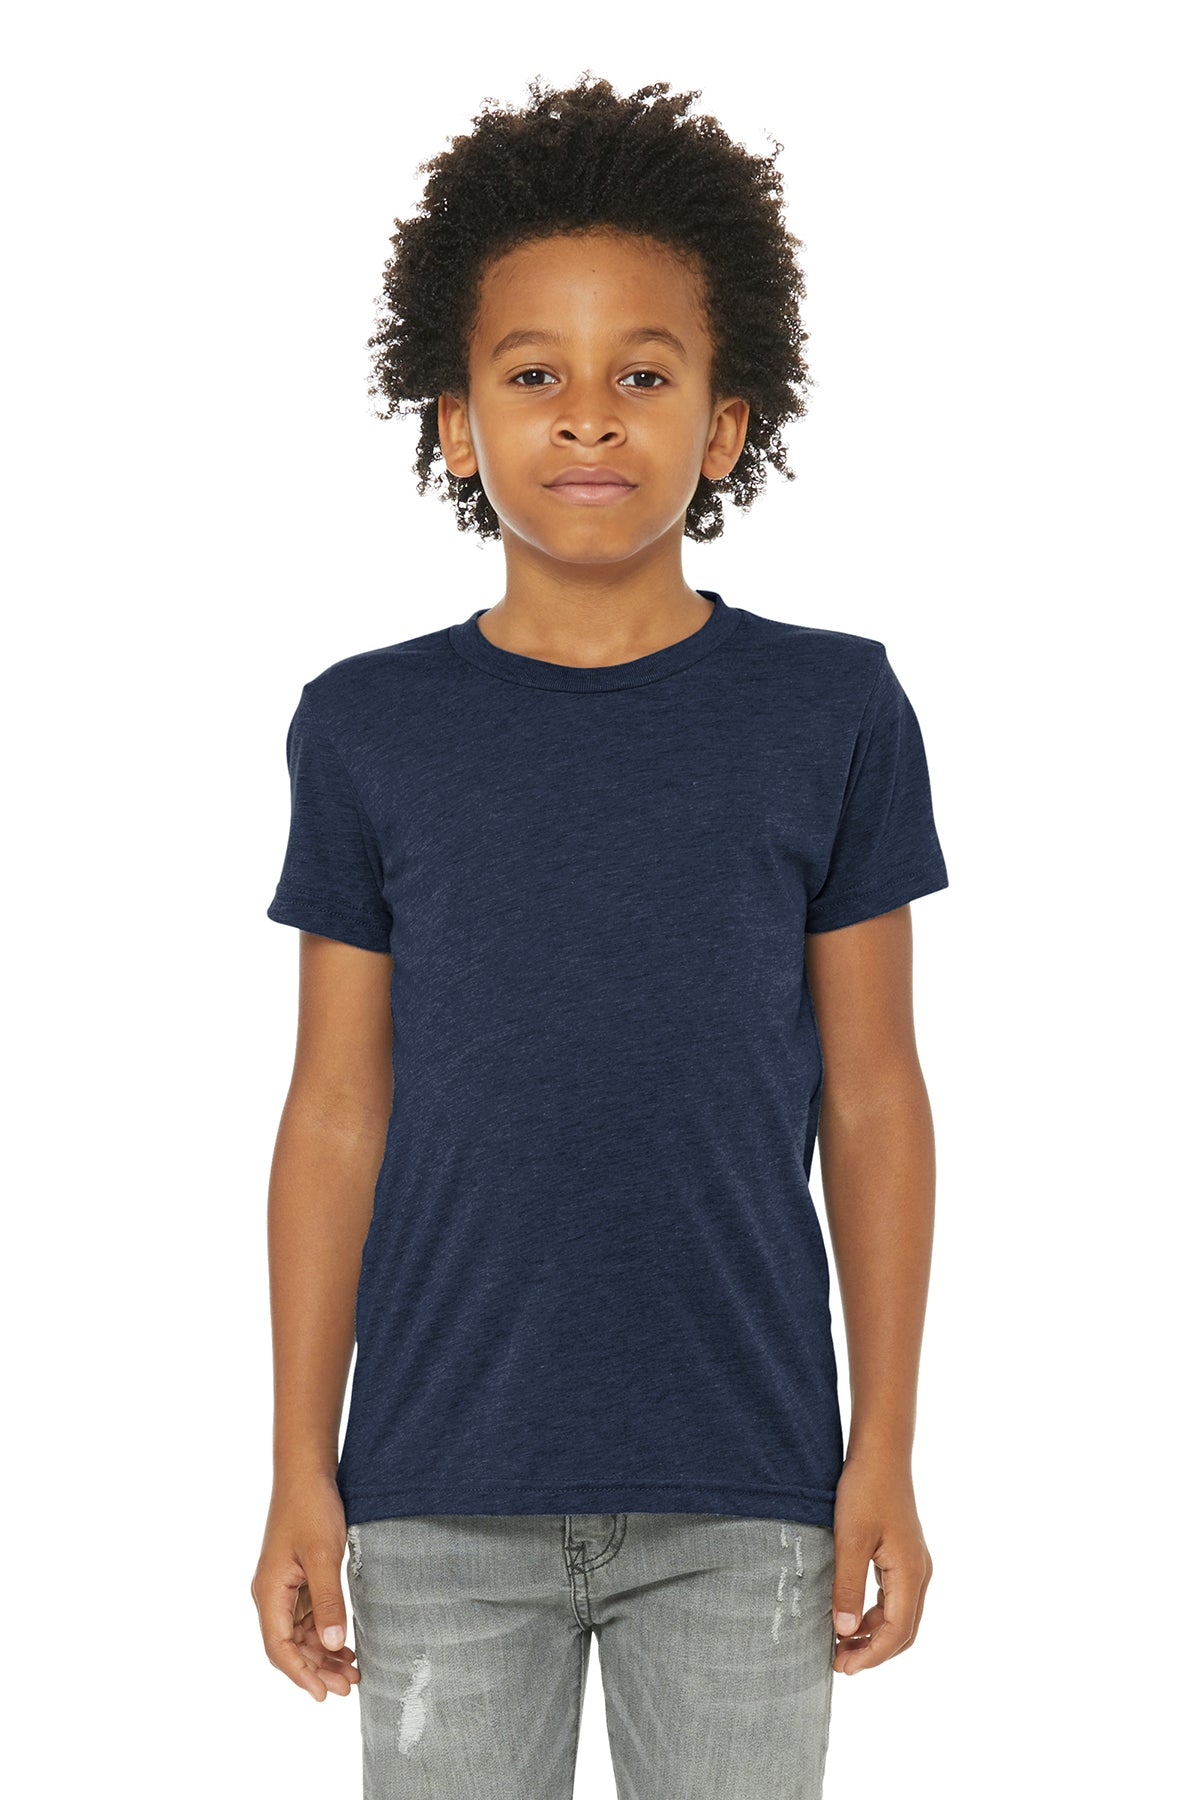 LL Two Oars Youth Triblend Short Sleeve Tee